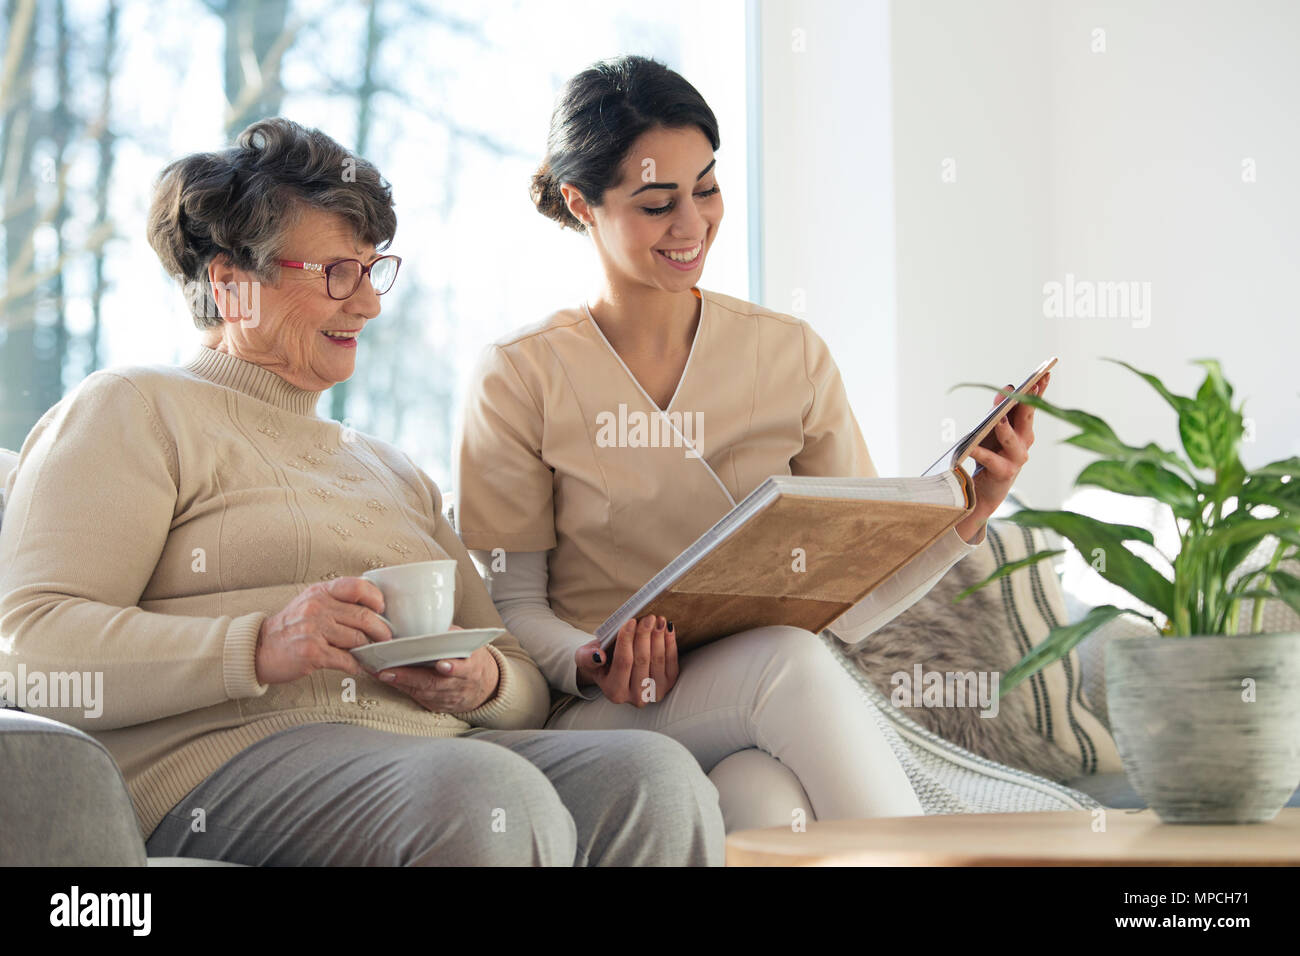 Smiling professional caretaker showing a family album to an elder woman in a living room at home Stock Photo